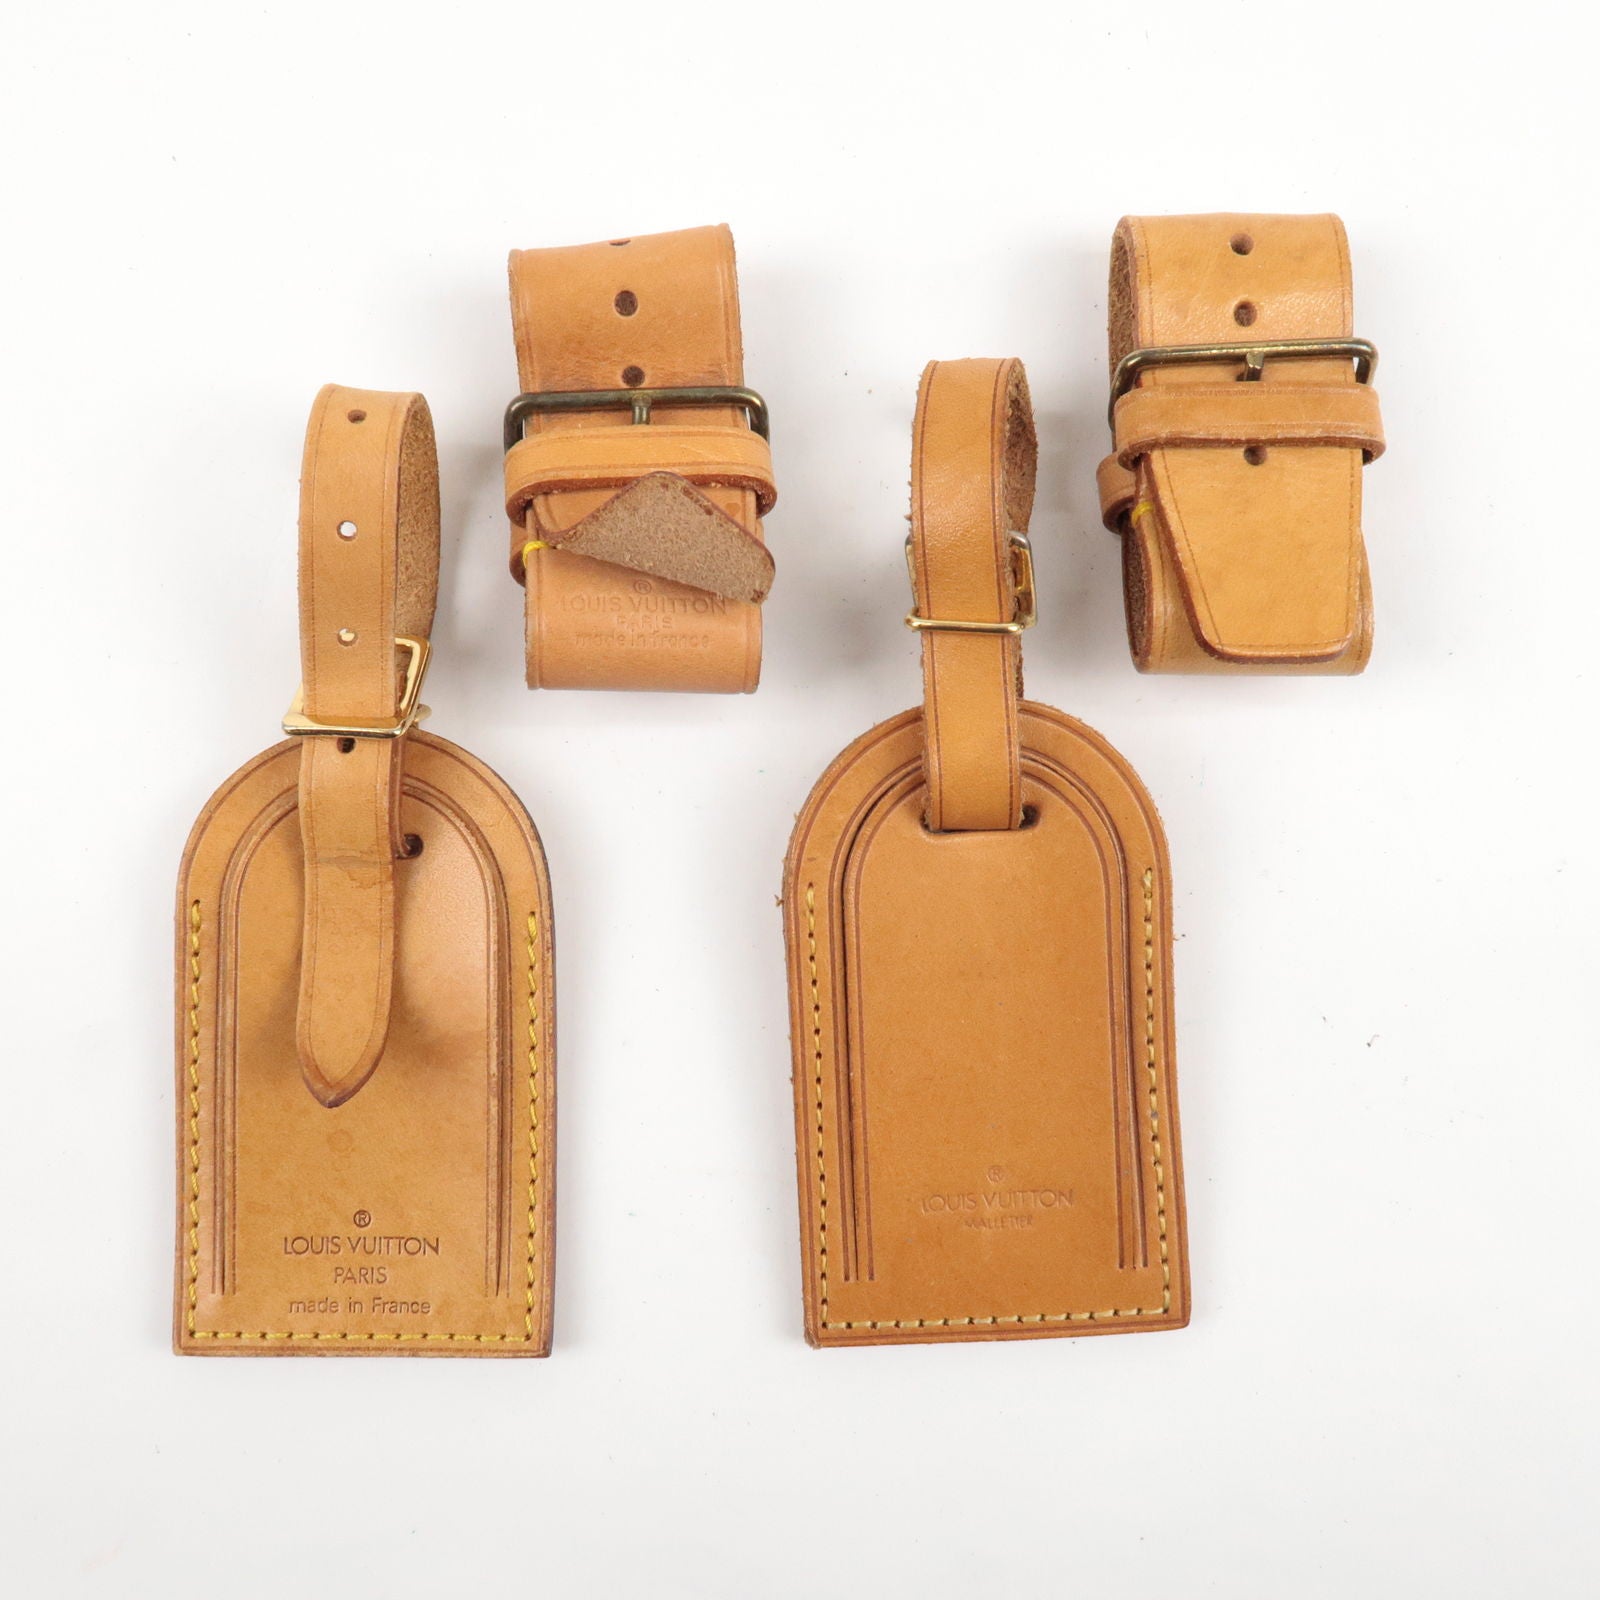 Vintage Louis Vuitton Luggage Tag and Poignier in Vachetta Leather